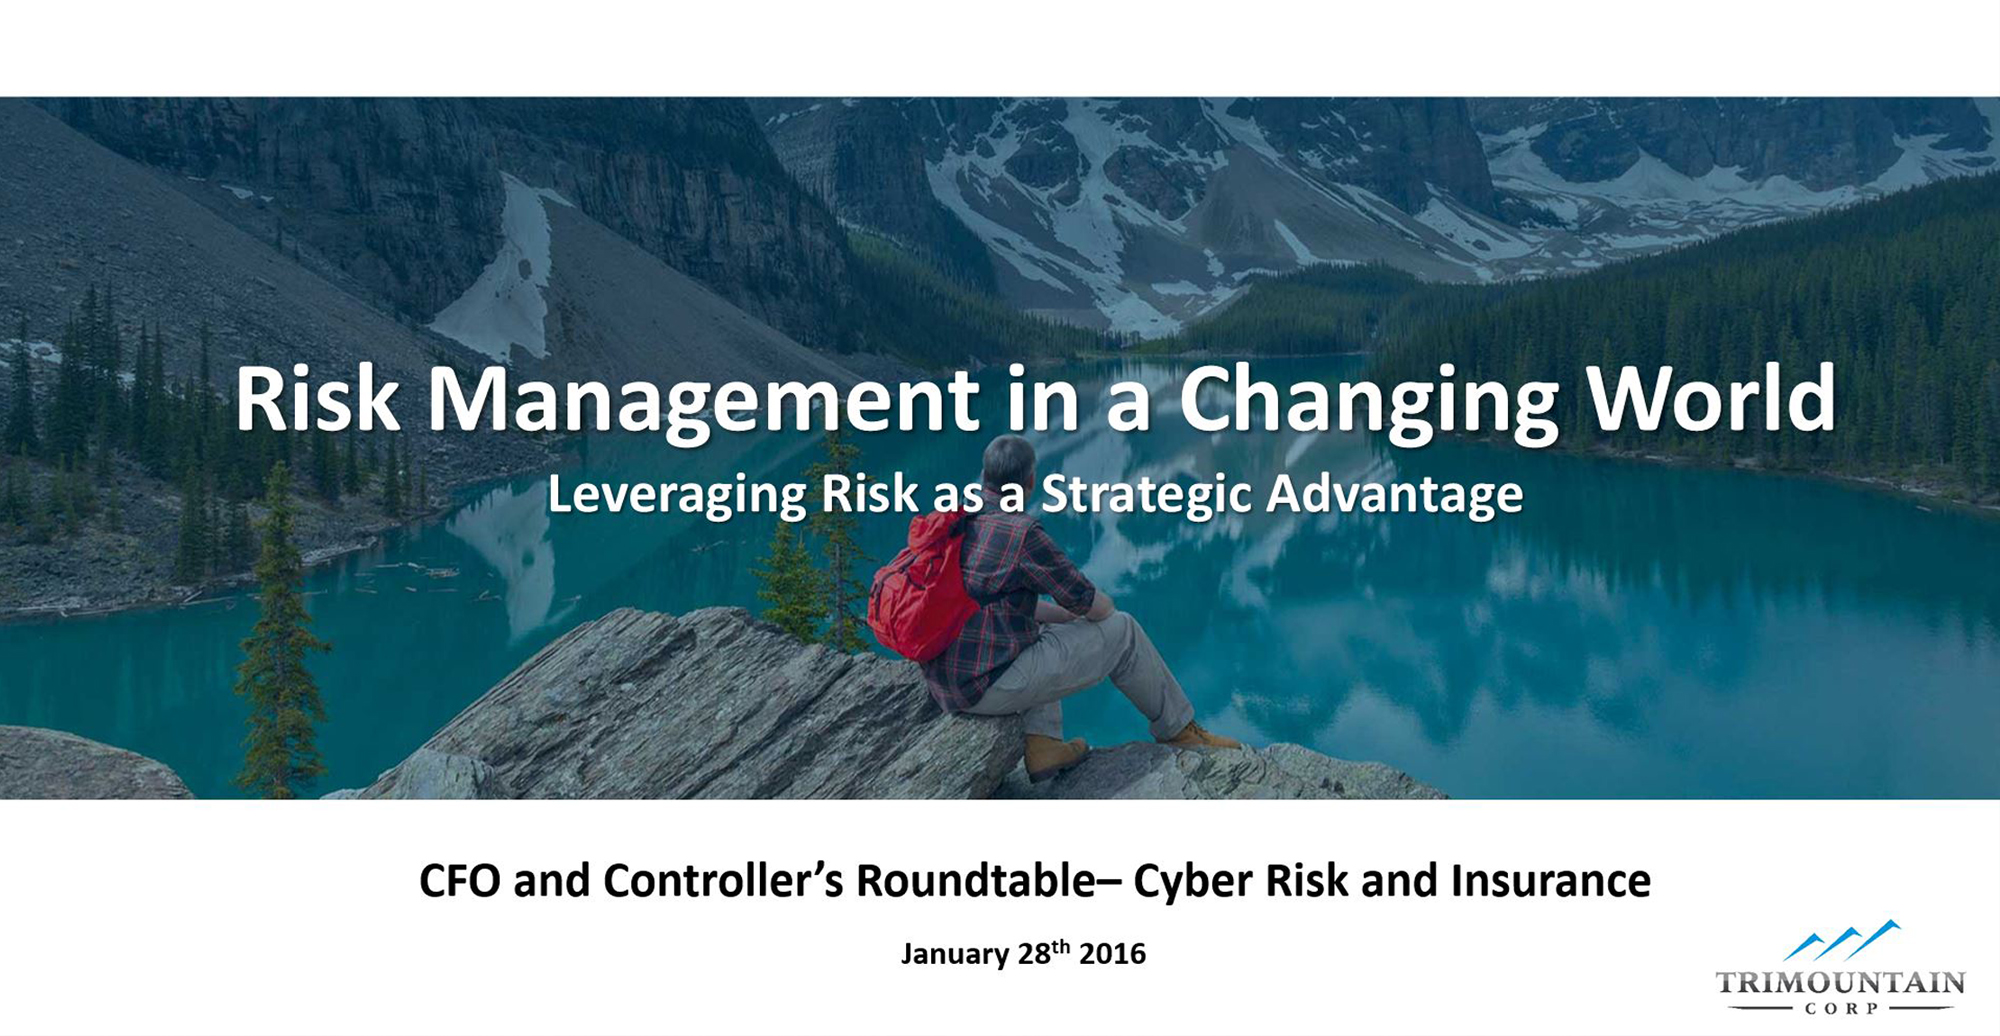 Risk Management in a Changing World